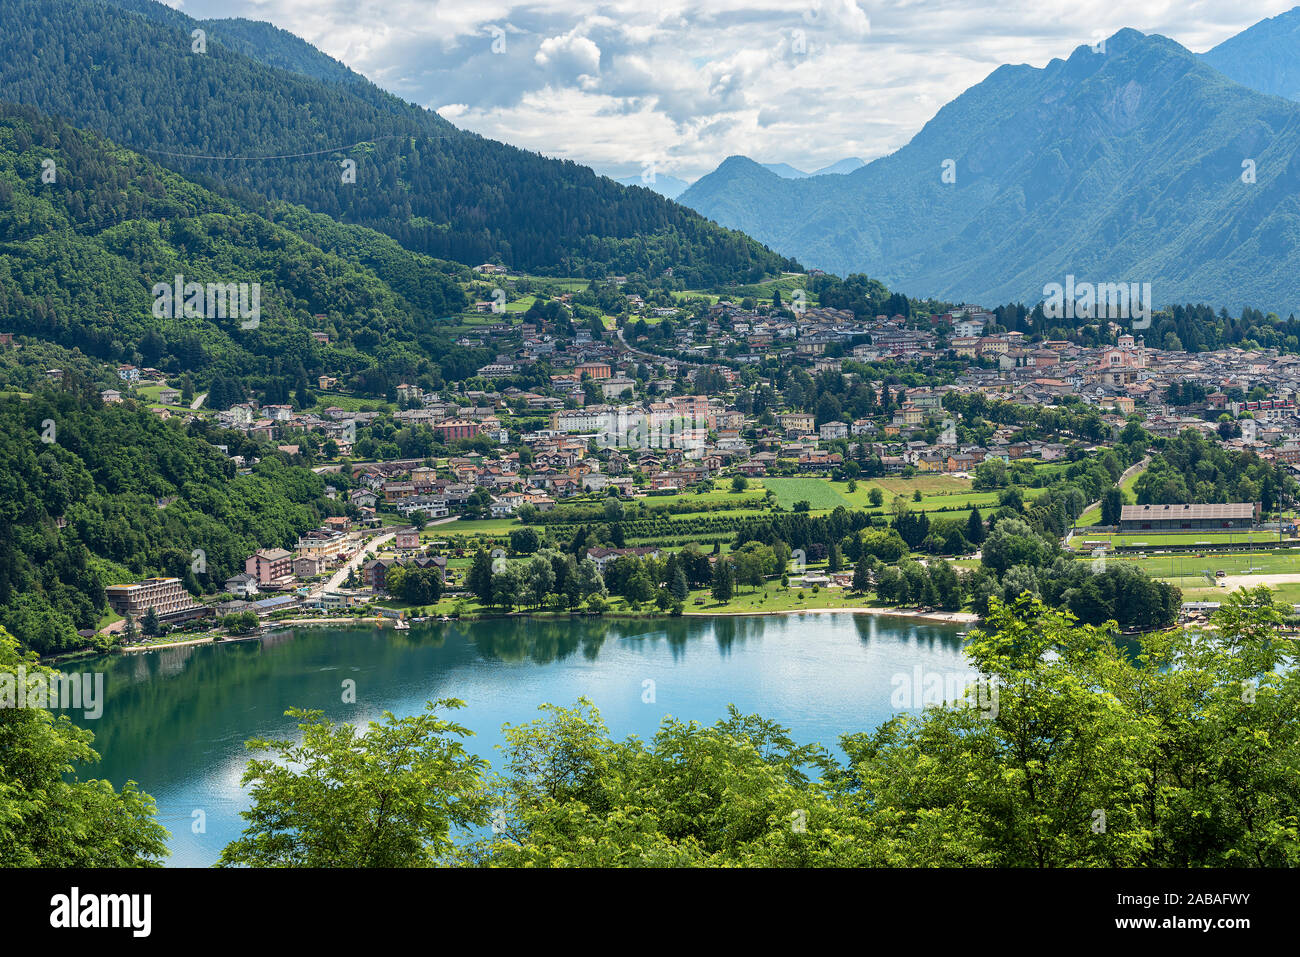 Aerial view of the small town of Levico Terme with the lake (Lago di Levico)  and the mountains, Alps. Trentino Alto Adige, Italy, Europe Stock Photo -  Alamy